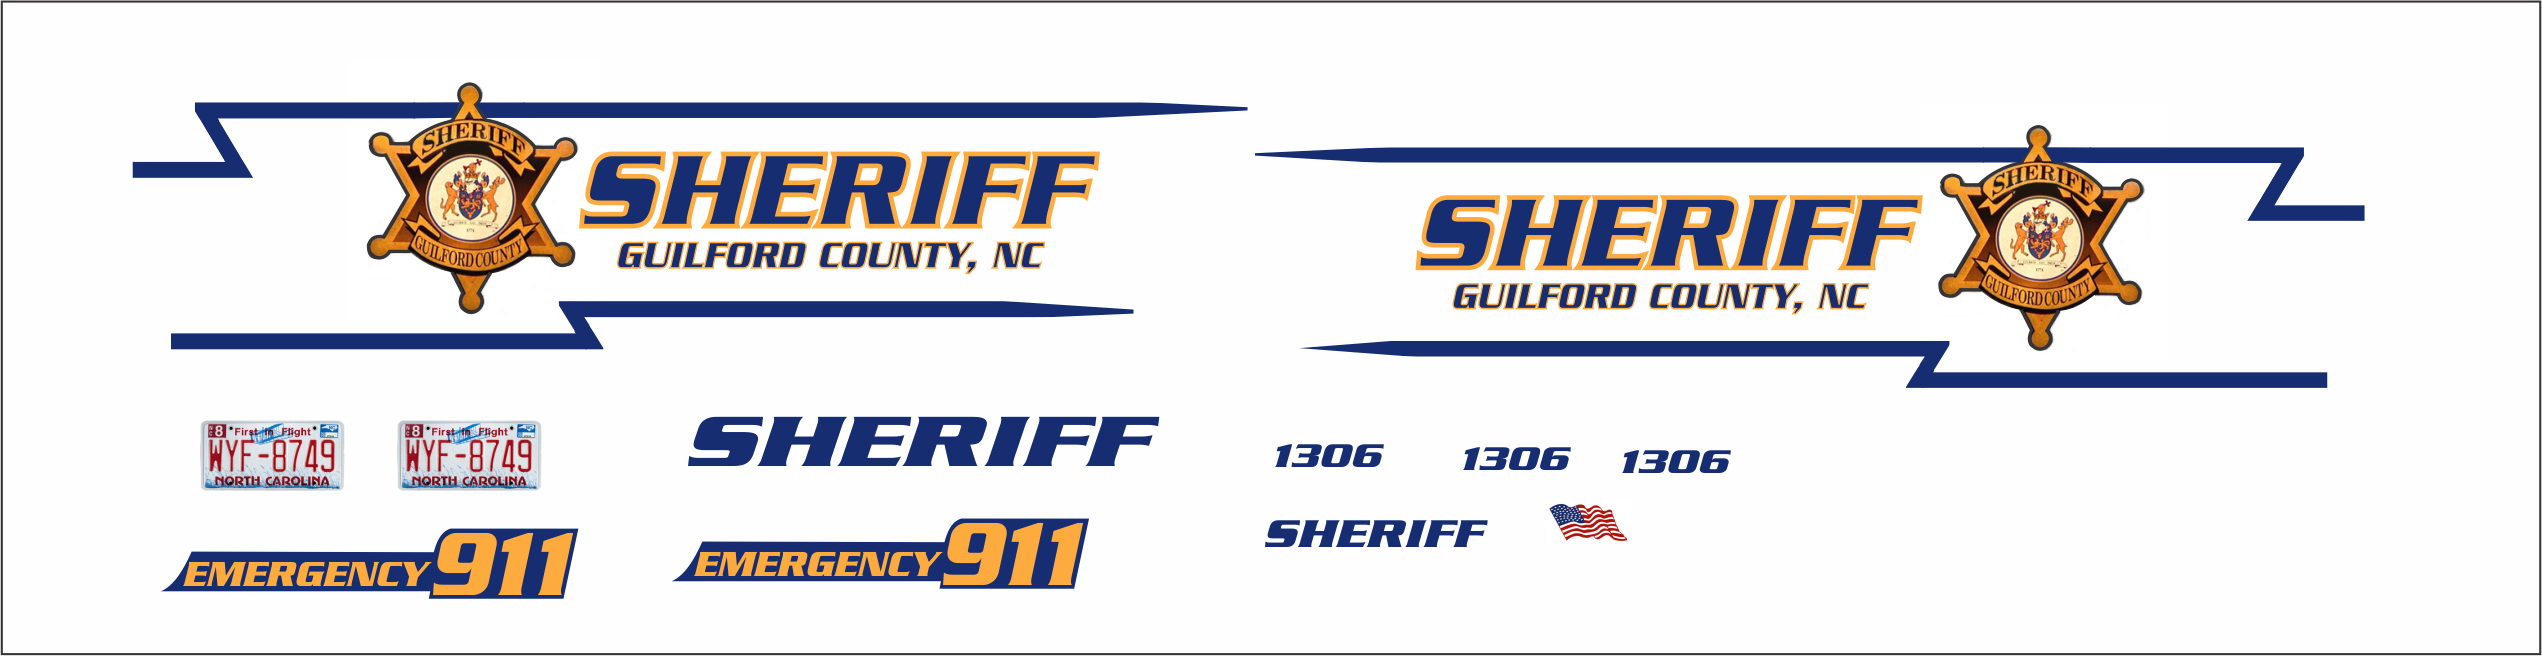 Guilford County, North Carolina Sheriff's Department 1/43 waterslide decals